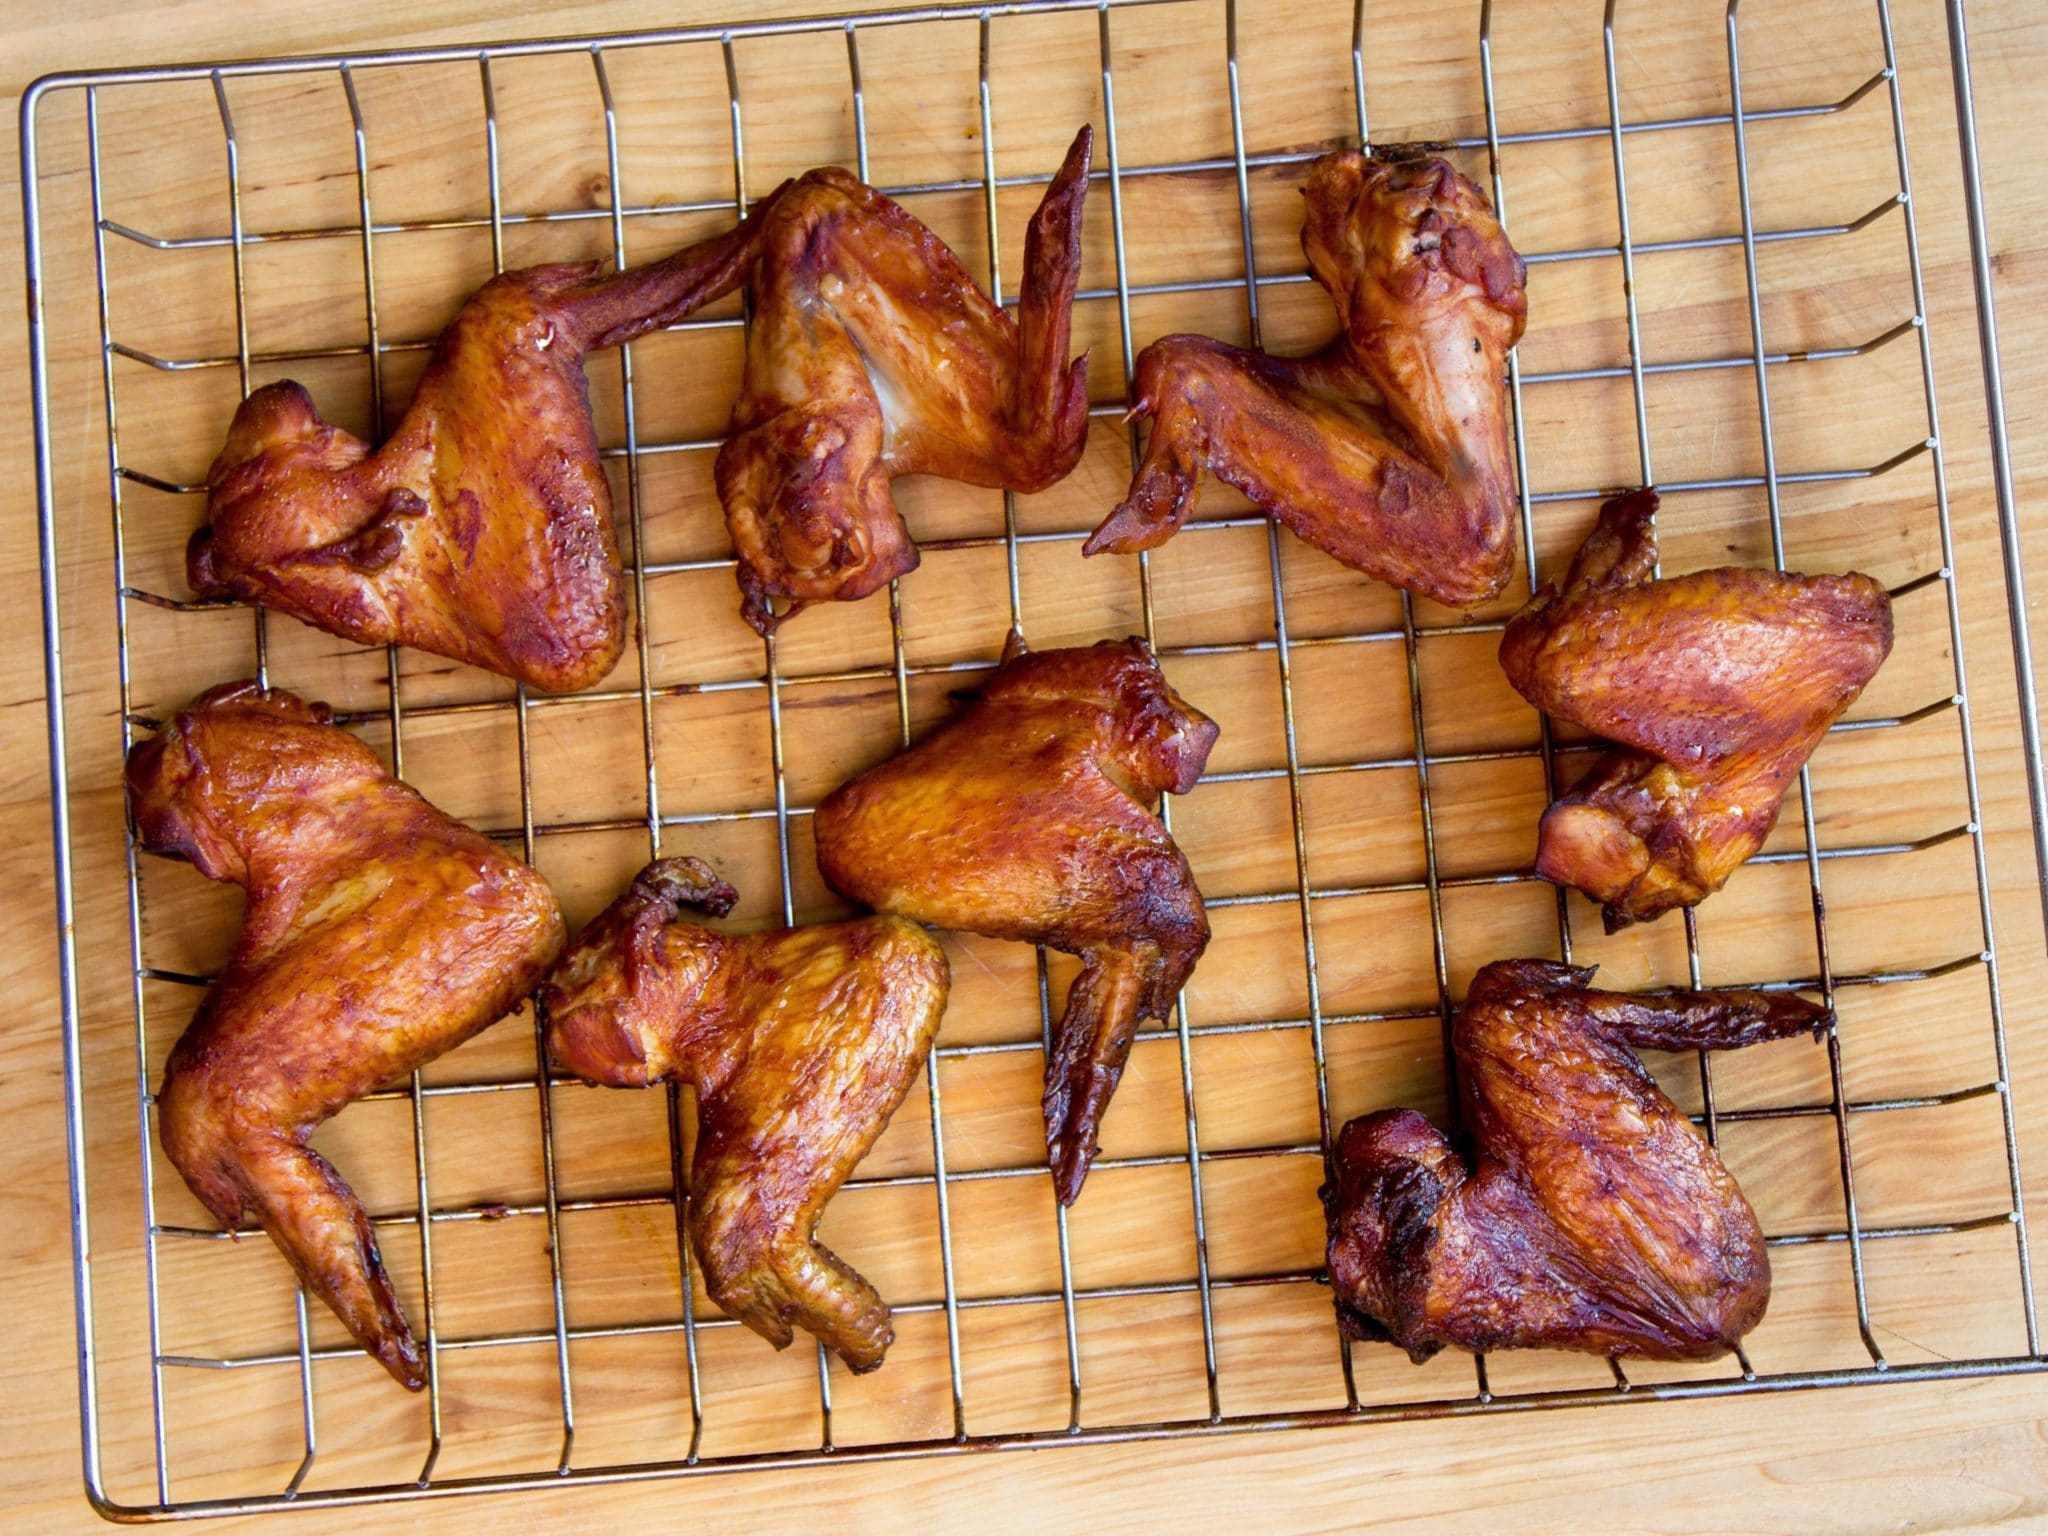 alt="smoked chicken wings"